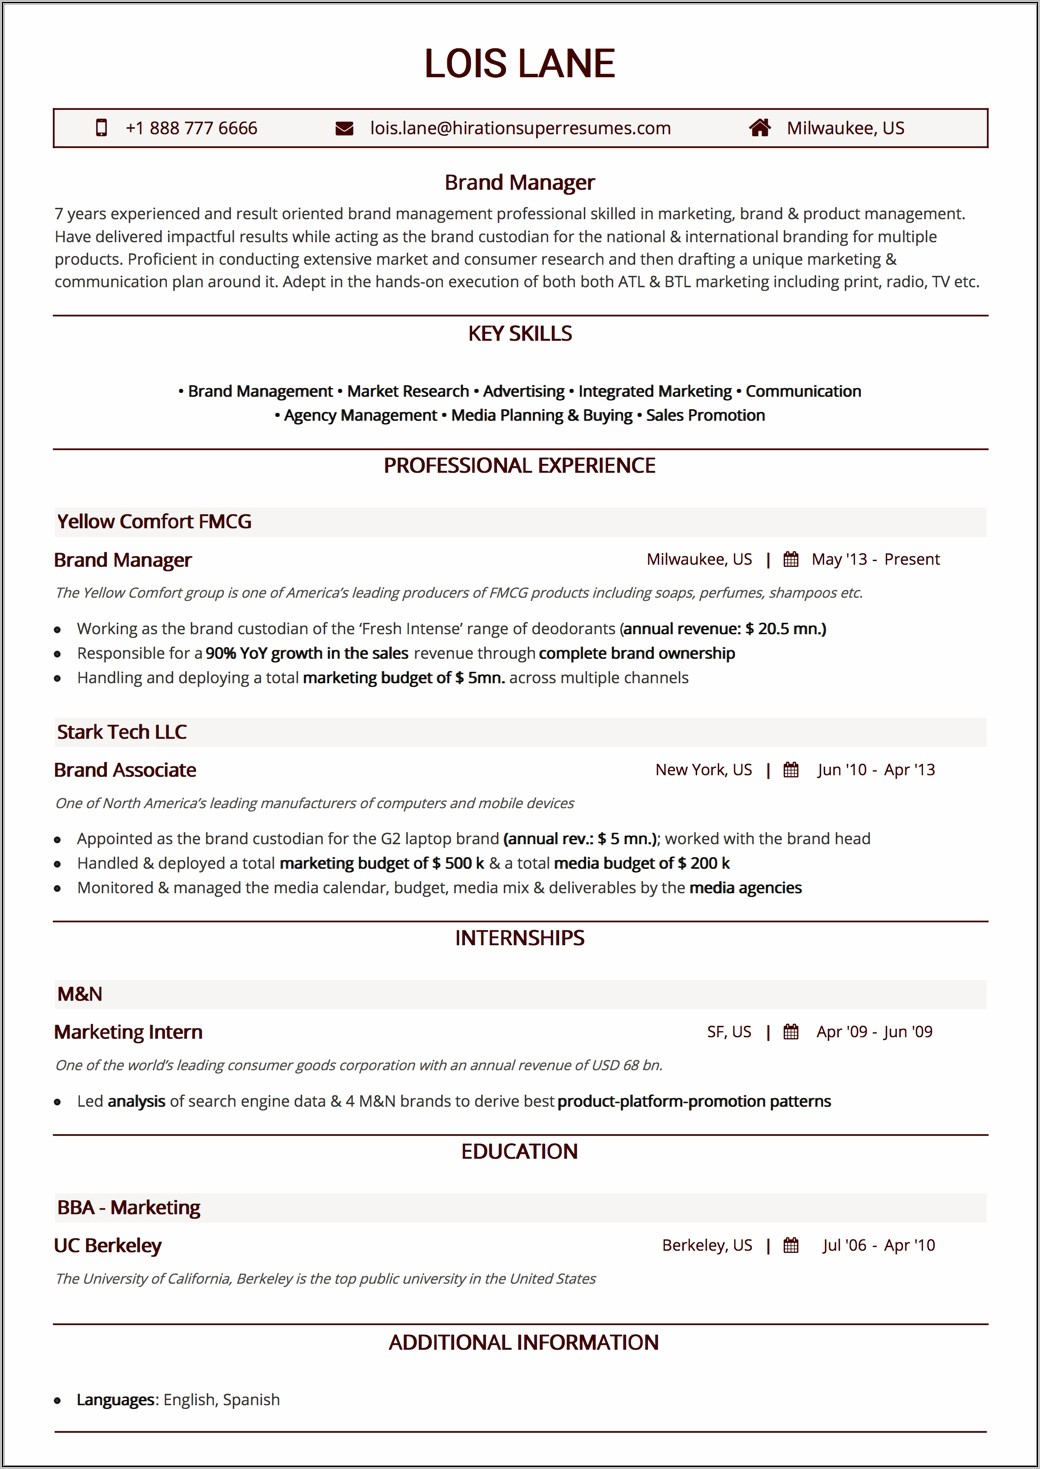 Mainframe Resume For 7 Years Experience